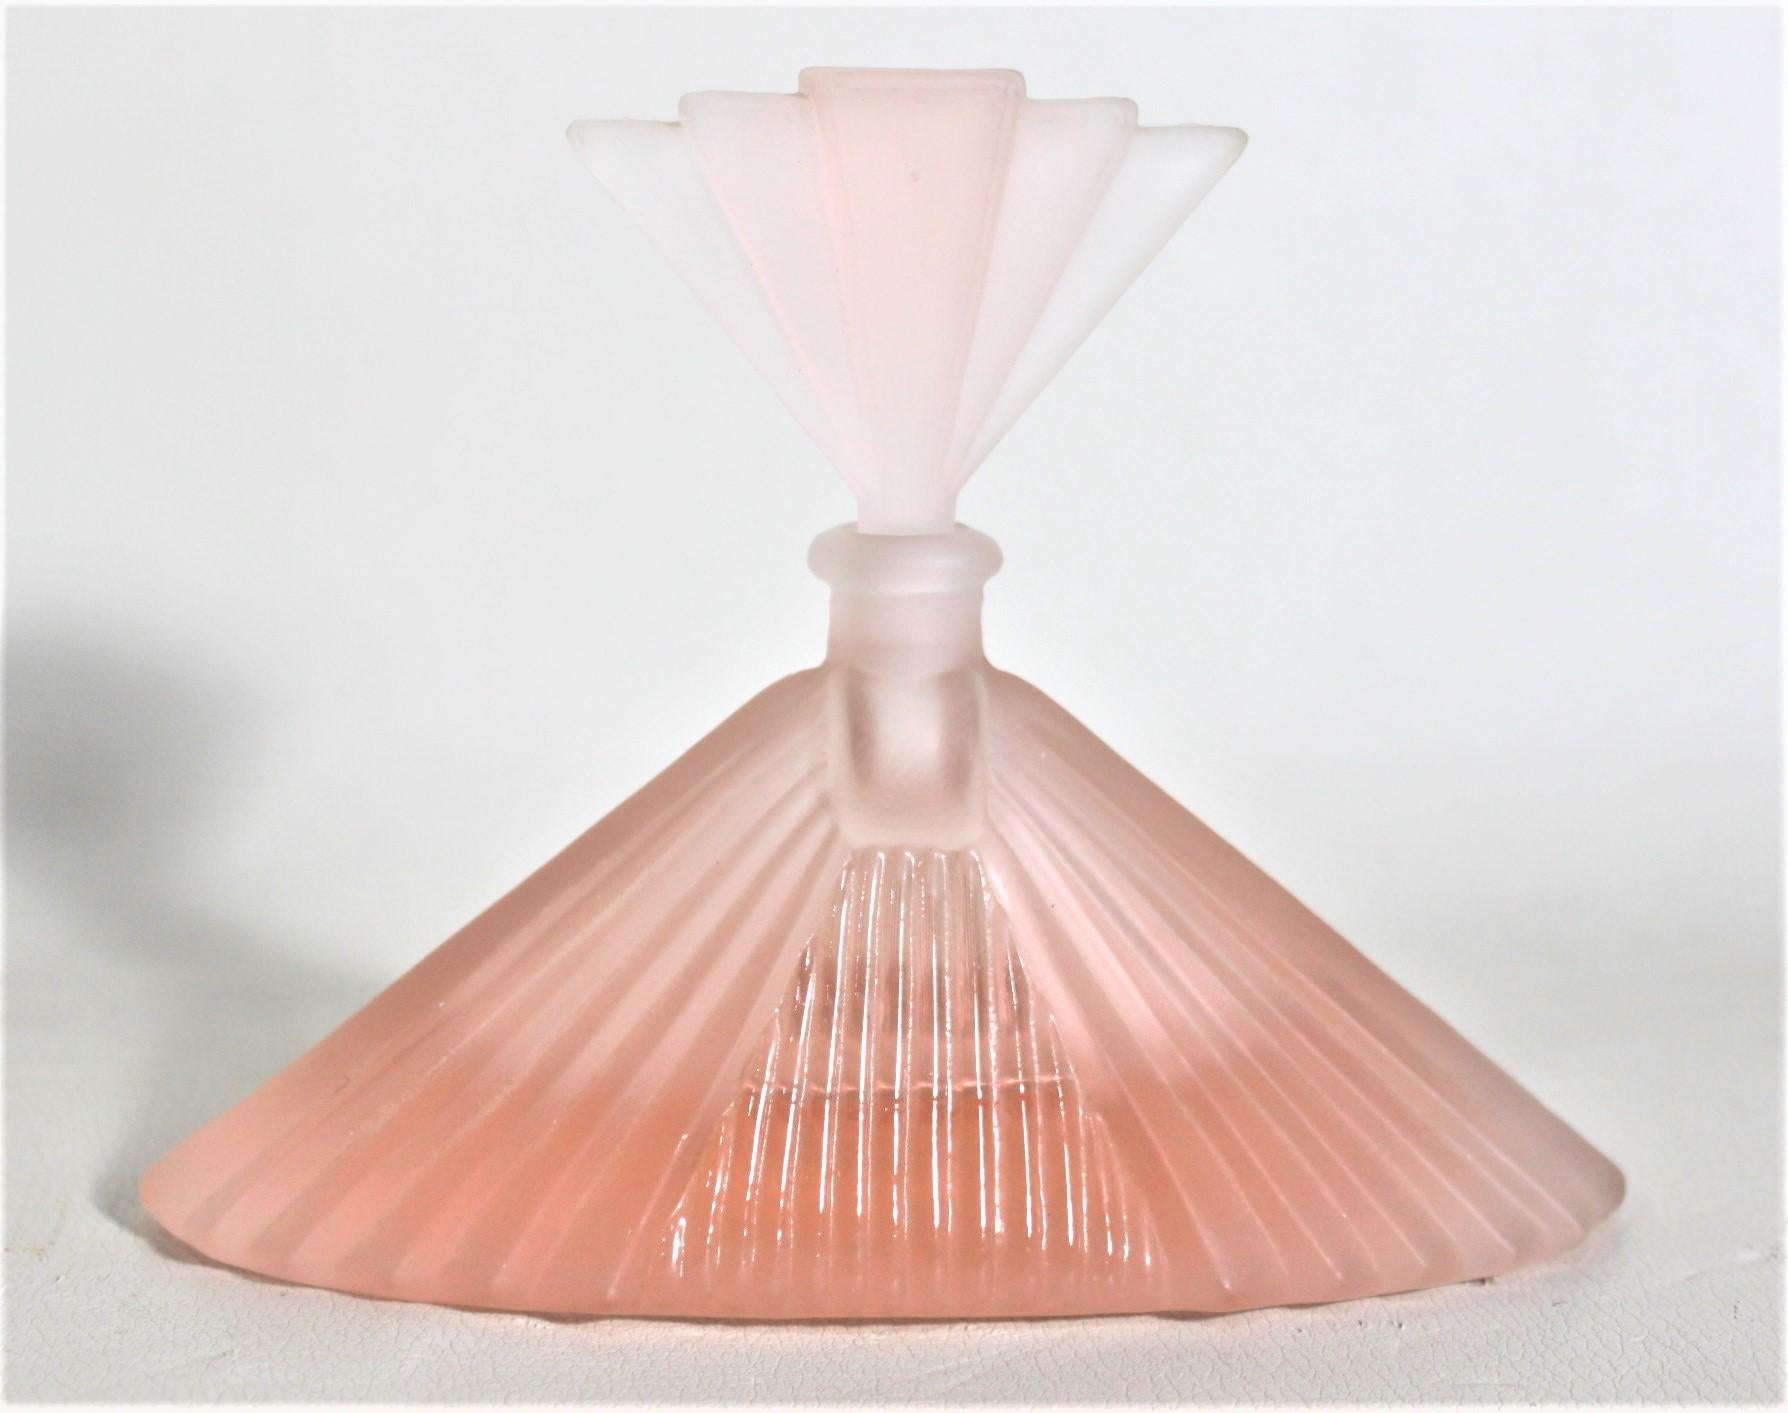 This Art Deco frosted pink perfume or scent bottle is unsigned, but presumed to have been made in France in approximately 1920 in the period style. The bottle is done in a frosted pale pink glass with a stopper in graduated pink tones. The base is